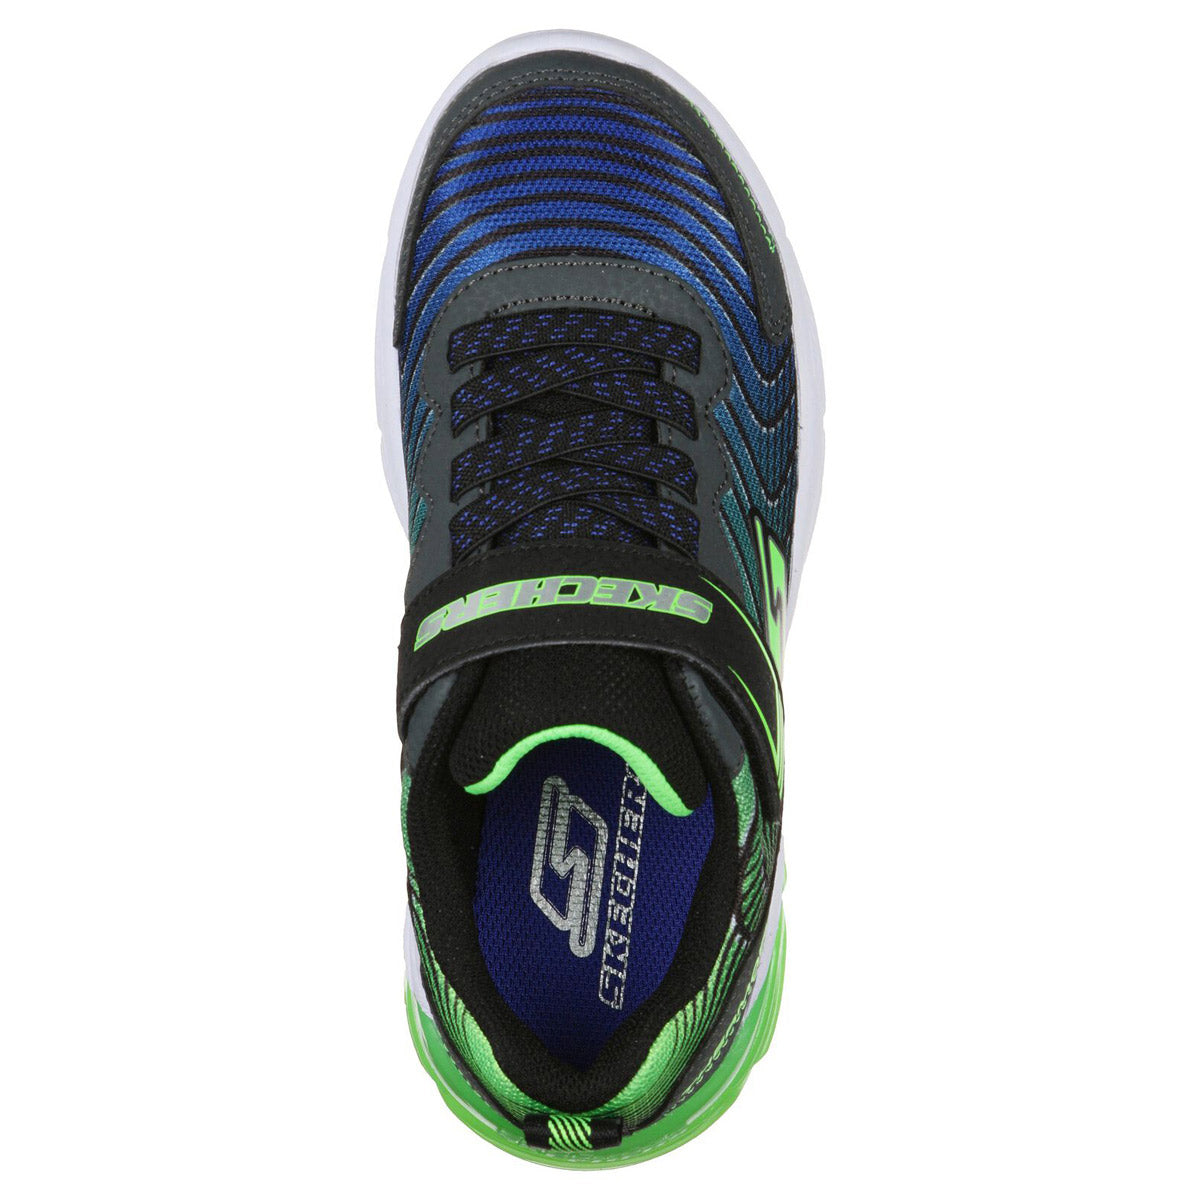 Top-down view of a blue and black Skechers ThermoFlux 2.0 Magnoid - Kids running shoe with green accents.